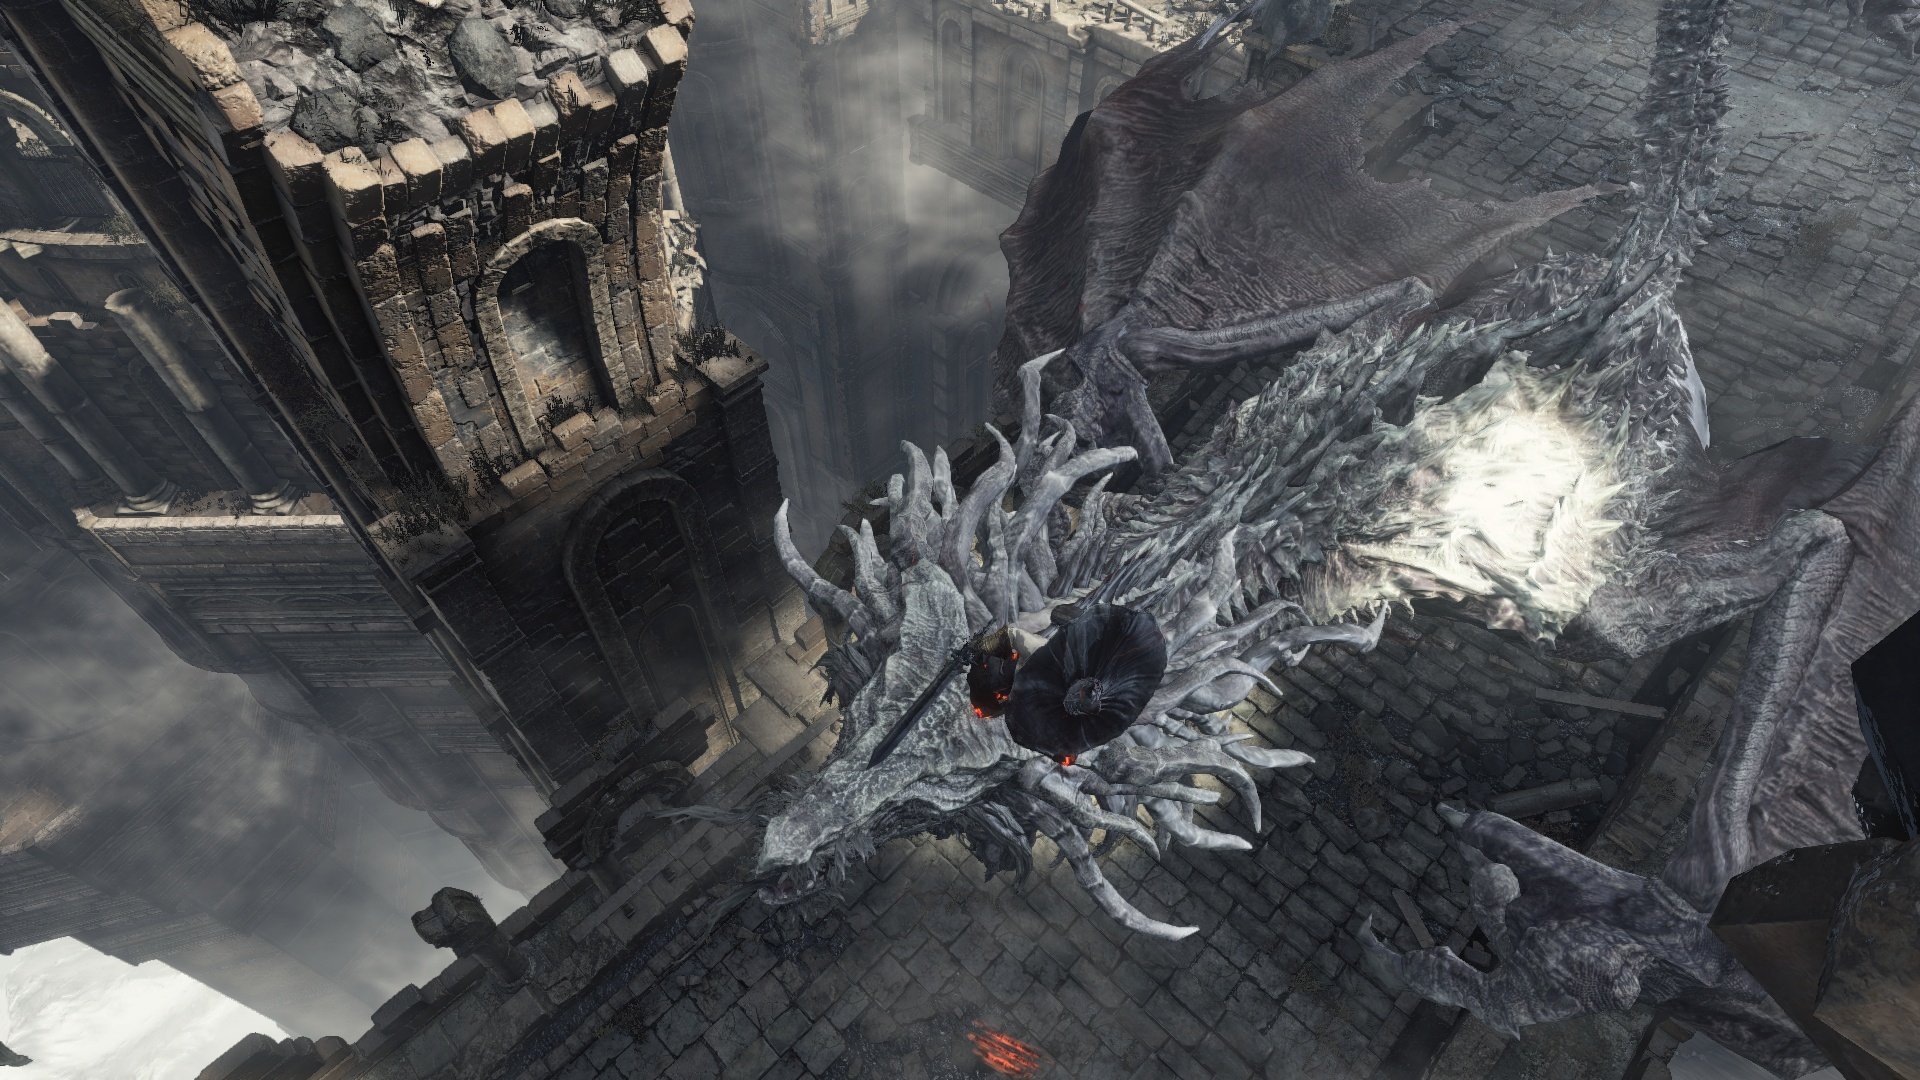 Jump attack onto the Ancient Wyvern's head